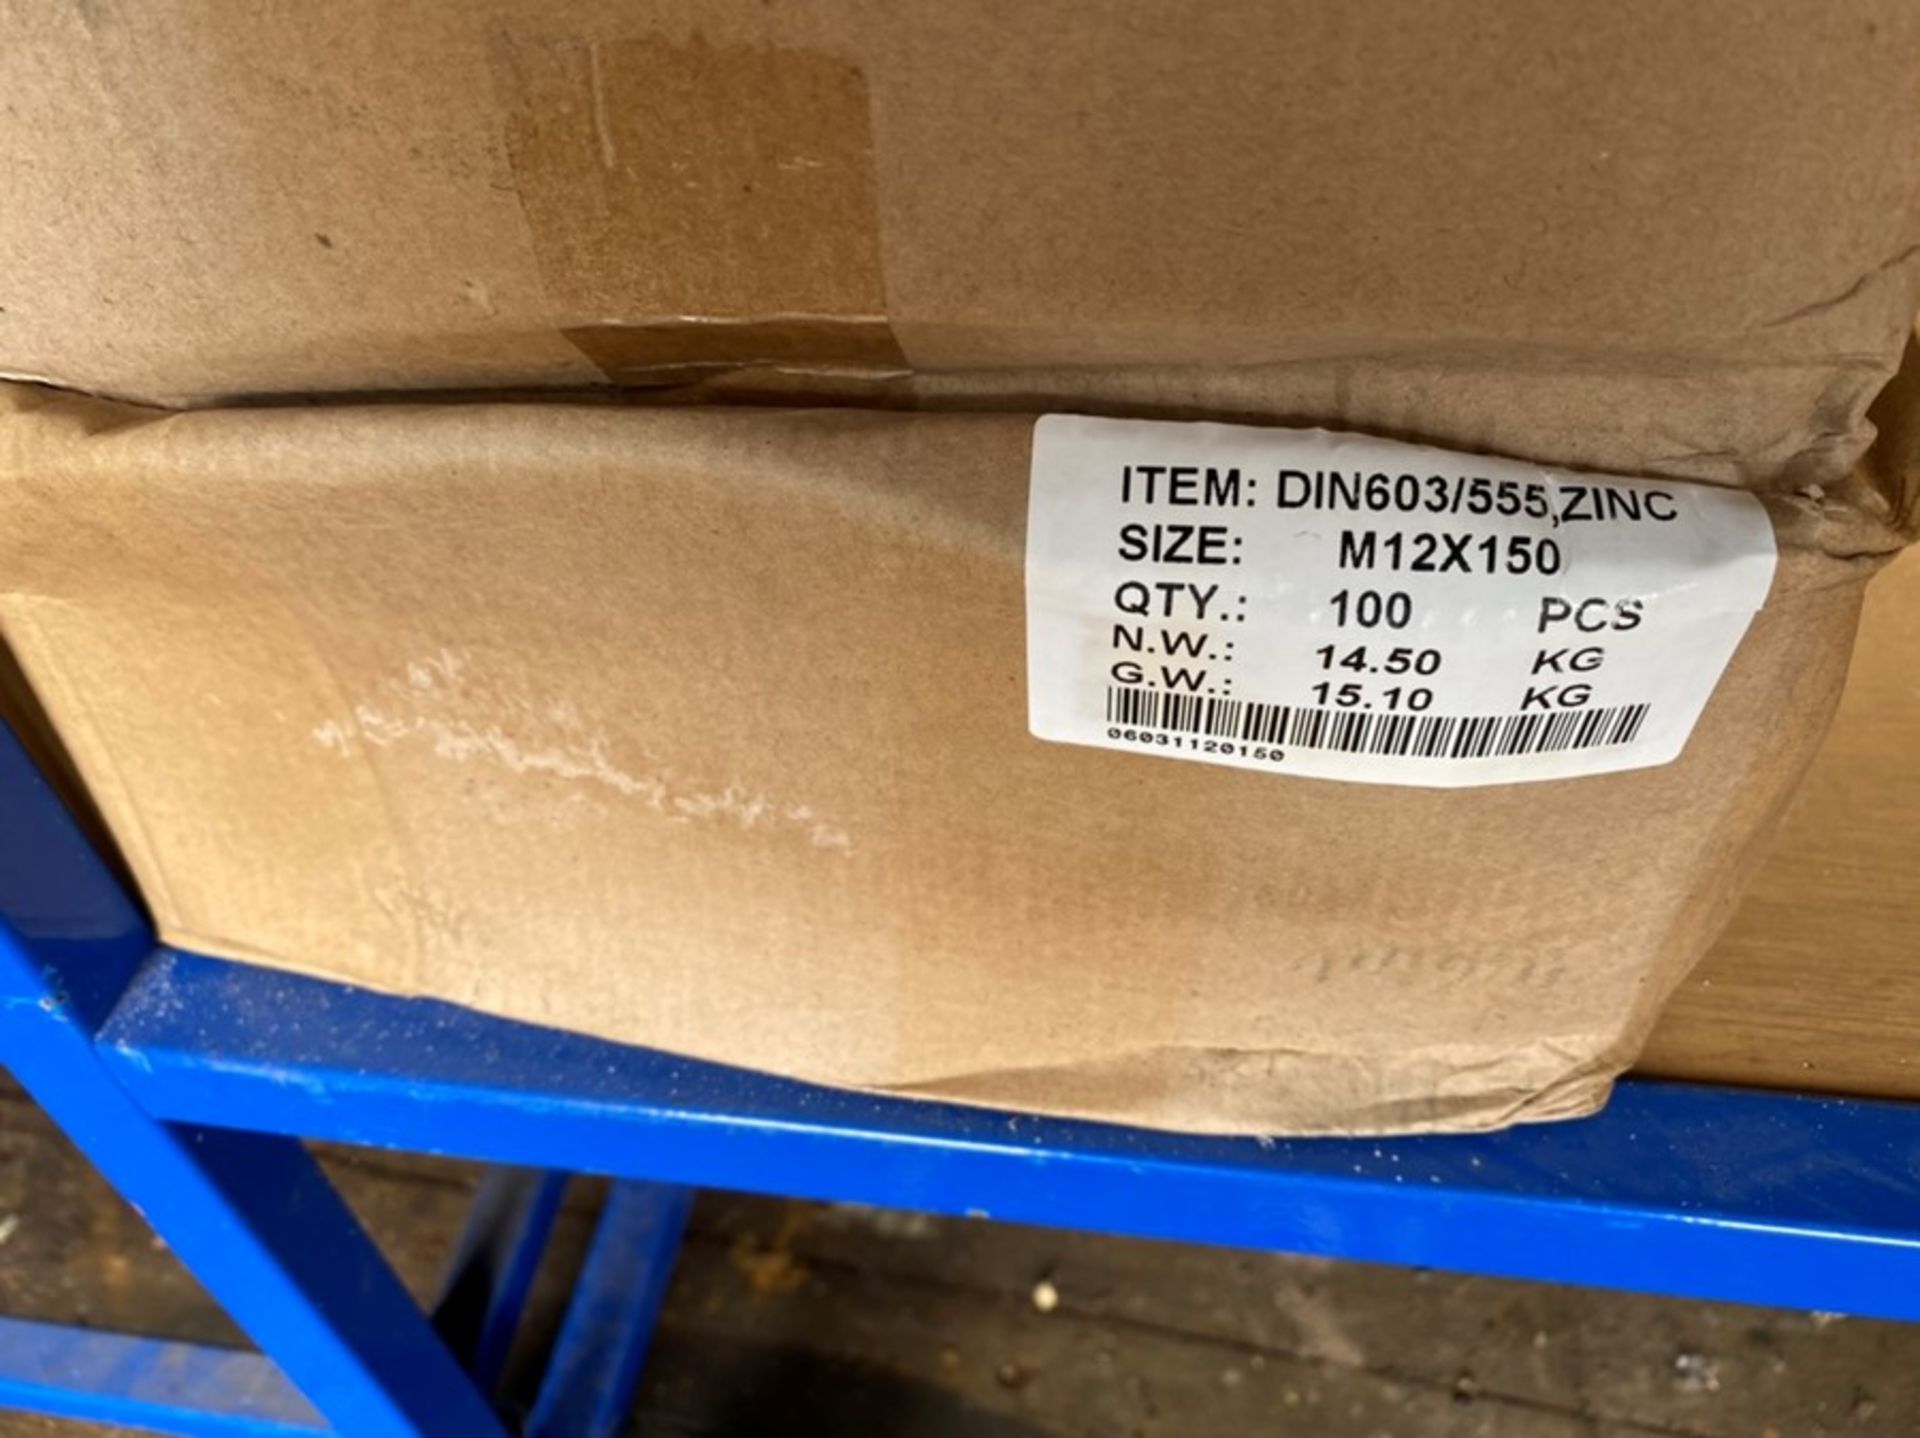 BOX OF 100 NUTS M12x150 (NO VAT ON THIS ITEM)